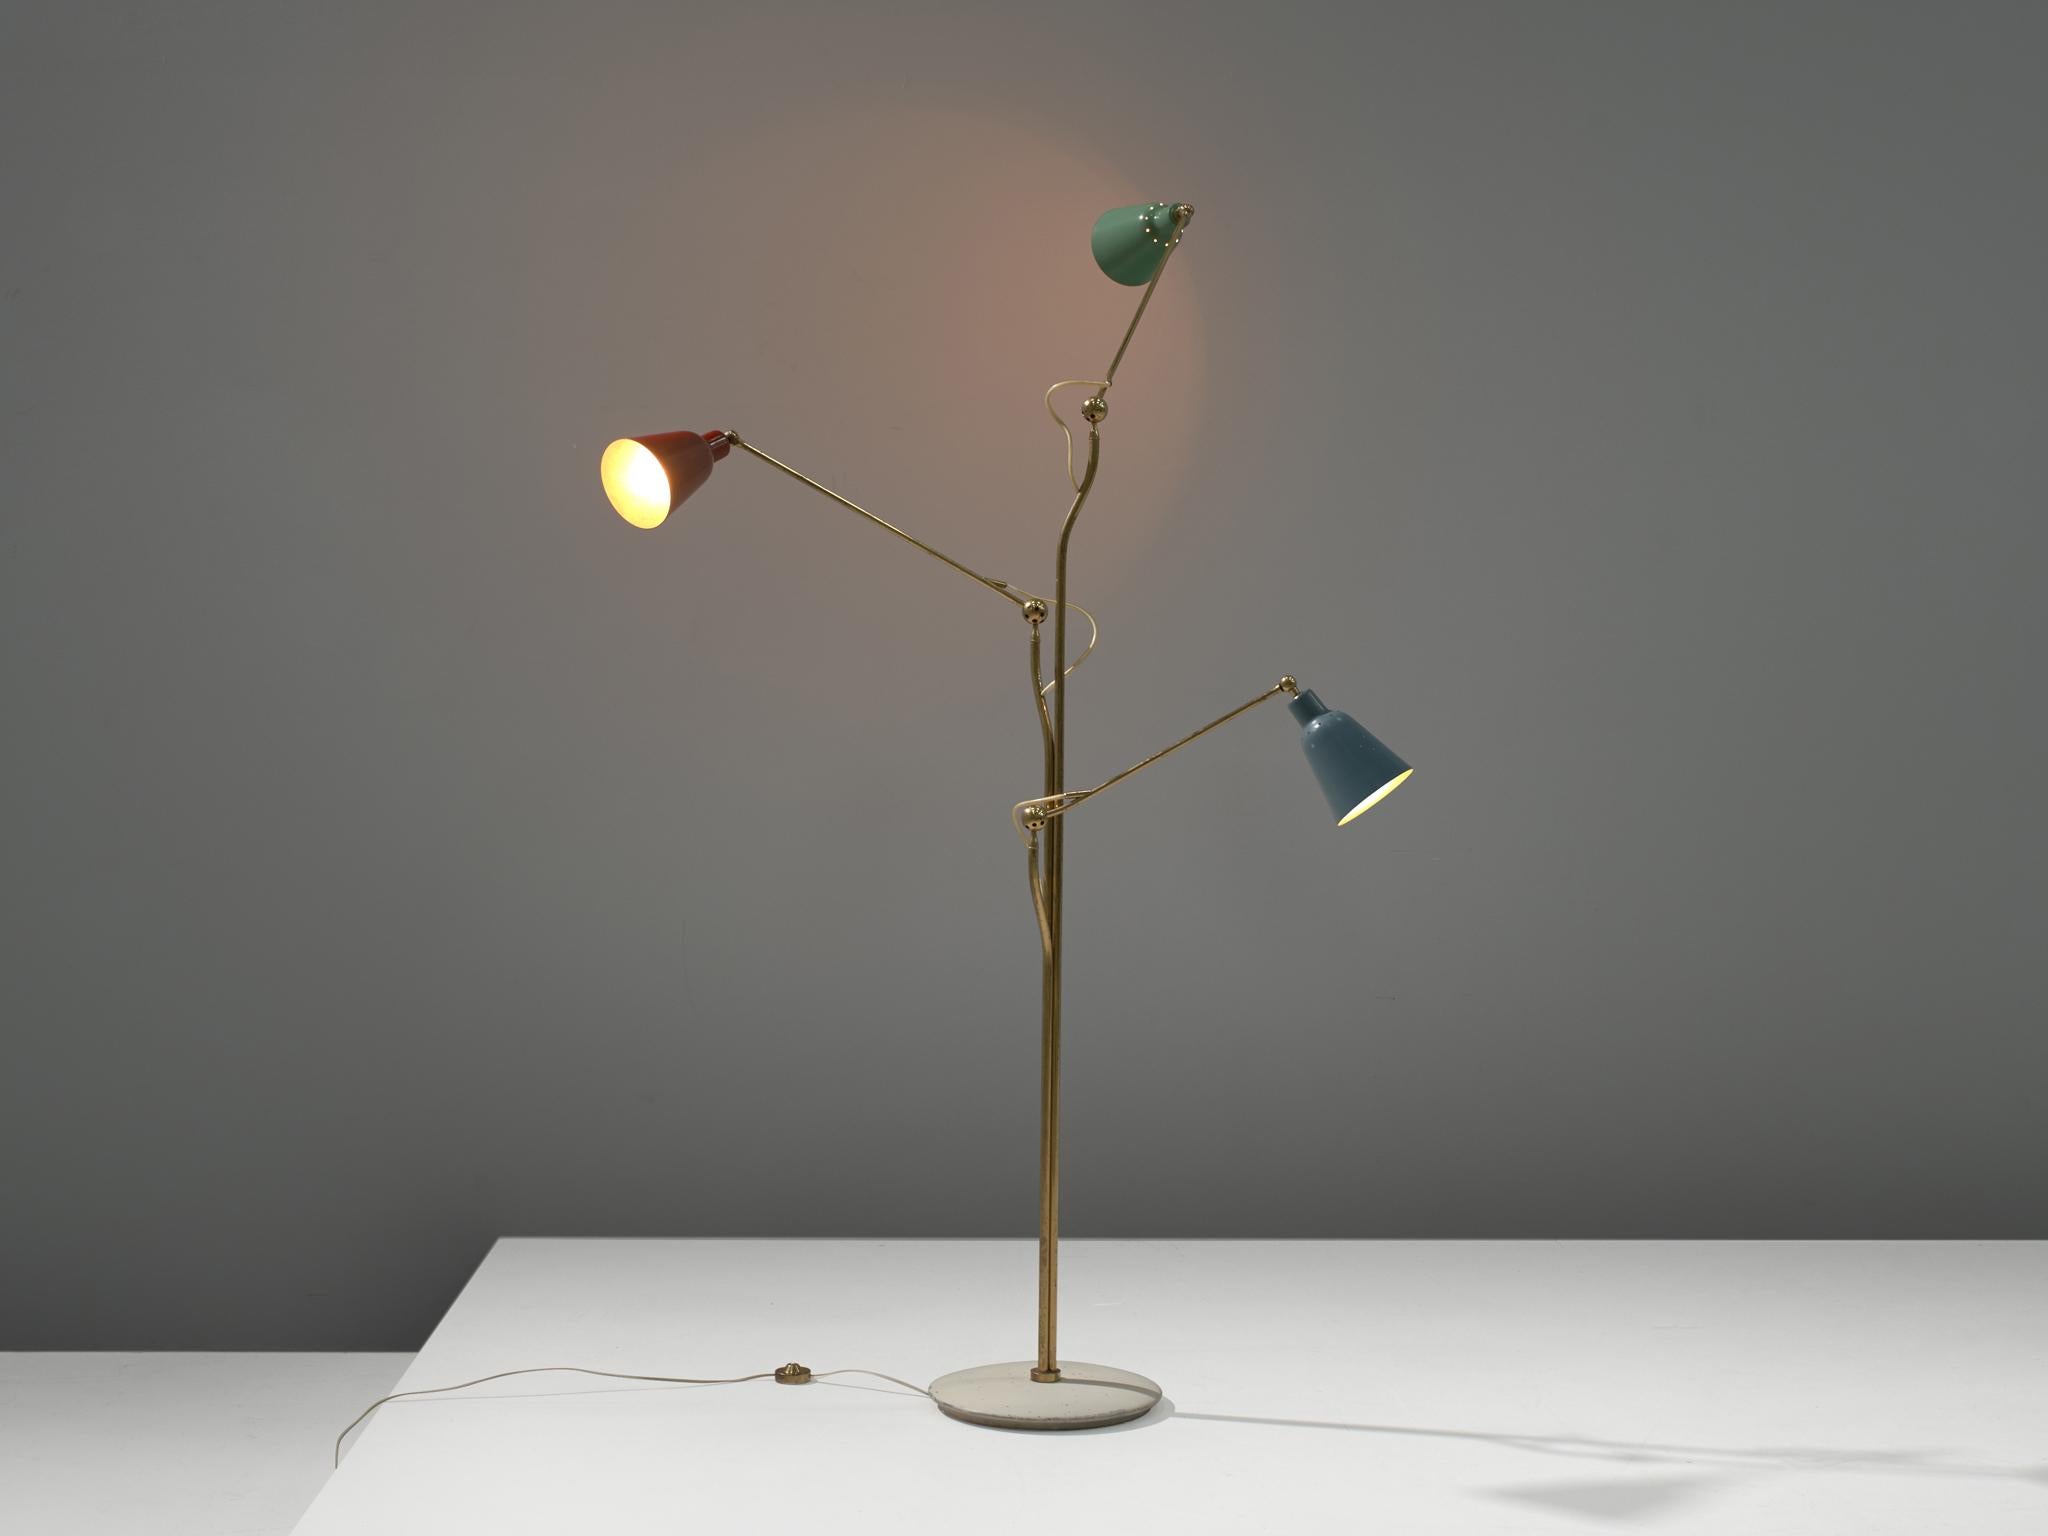 Angelo Lelii for Arredoluce, floor lamp, metal, brass, Italy, 1950s

This iconic floor lamp was designed by Angelo Lelli and manufactured by Arredoluce, Italy in 1950. This lamp was a symbol of the 1950s, due to its fixtures. It was designed in the